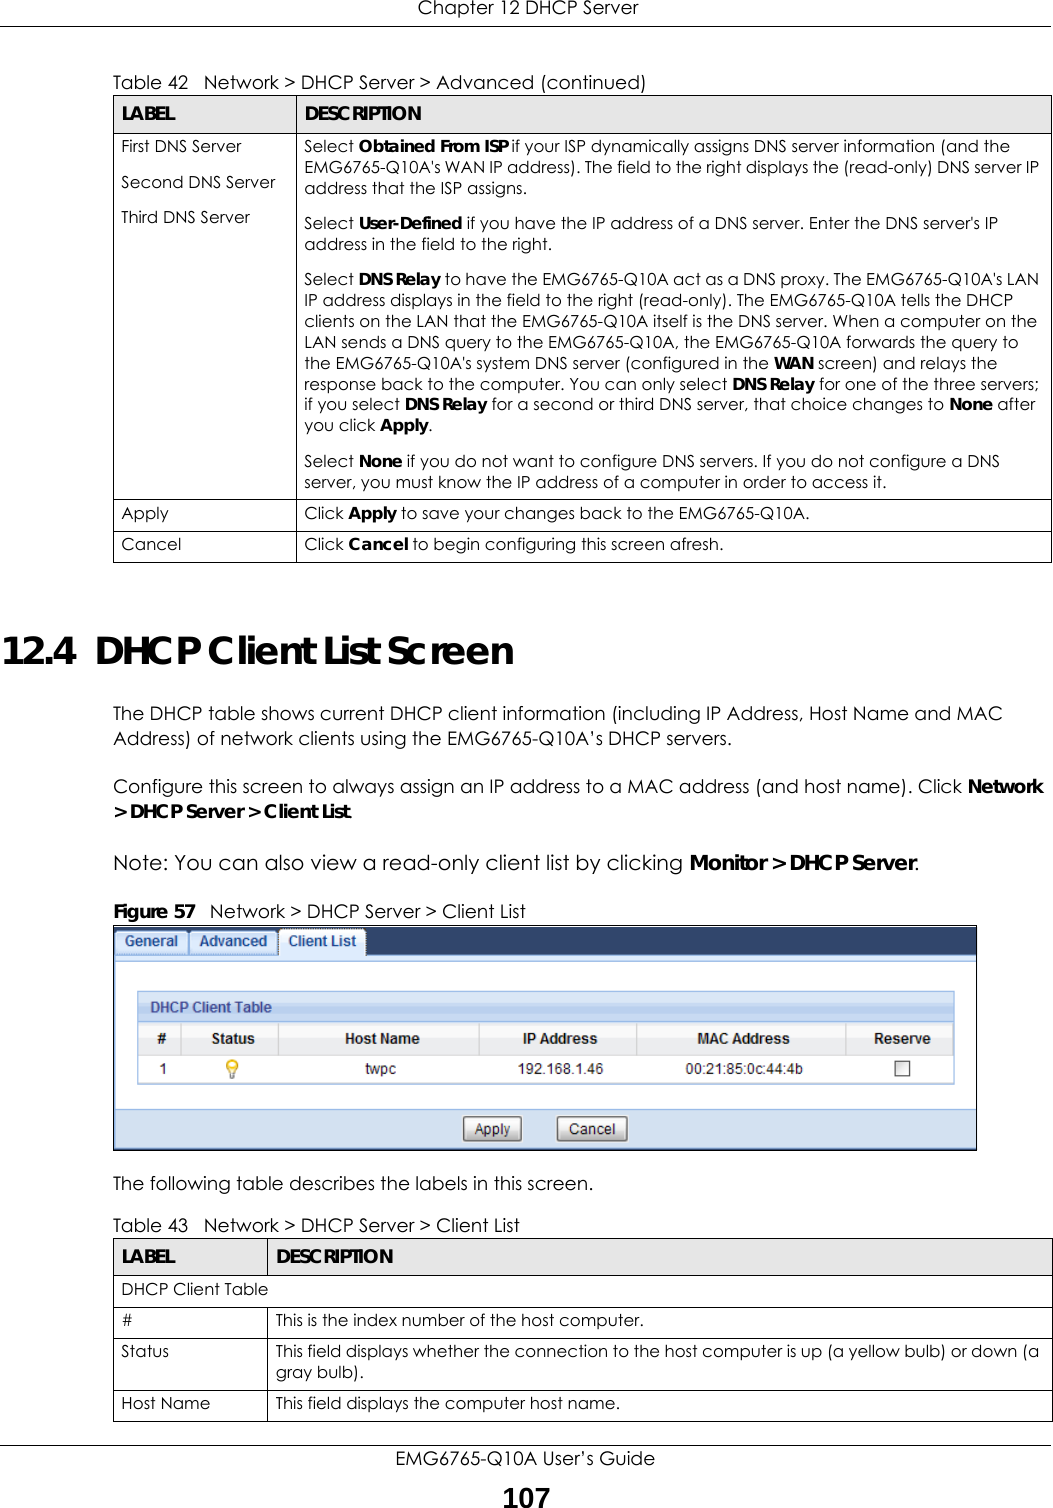  Chapter 12 DHCP ServerEMG6765-Q10A User’s Guide10712.4  DHCP Client List ScreenThe DHCP table shows current DHCP client information (including IP Address, Host Name and MAC Address) of network clients using the EMG6765-Q10A’s DHCP servers.Configure this screen to always assign an IP address to a MAC address (and host name). Click Network &gt; DHCP Server &gt; Client List. Note: You can also view a read-only client list by clicking Monitor &gt; DHCP Server. Figure 57   Network &gt; DHCP Server &gt; Client ListThe following table describes the labels in this screen.First DNS ServerSecond DNS Server Third DNS ServerSelect Obtained From ISP if your ISP dynamically assigns DNS server information (and the EMG6765-Q10A&apos;s WAN IP address). The field to the right displays the (read-only) DNS server IP address that the ISP assigns. Select User-Defined if you have the IP address of a DNS server. Enter the DNS server&apos;s IP address in the field to the right. Select DNS Relay to have the EMG6765-Q10A act as a DNS proxy. The EMG6765-Q10A&apos;s LAN IP address displays in the field to the right (read-only). The EMG6765-Q10A tells the DHCP clients on the LAN that the EMG6765-Q10A itself is the DNS server. When a computer on the LAN sends a DNS query to the EMG6765-Q10A, the EMG6765-Q10A forwards the query to the EMG6765-Q10A&apos;s system DNS server (configured in the WAN screen) and relays the response back to the computer. You can only select DNS Relay for one of the three servers; if you select DNS Relay for a second or third DNS server, that choice changes to None after you click Apply. Select None if you do not want to configure DNS servers. If you do not configure a DNS server, you must know the IP address of a computer in order to access it.Apply Click Apply to save your changes back to the EMG6765-Q10A.Cancel Click Cancel to begin configuring this screen afresh.Table 42   Network &gt; DHCP Server &gt; Advanced (continued)LABEL DESCRIPTIONTable 43   Network &gt; DHCP Server &gt; Client ListLABEL  DESCRIPTIONDHCP Client Table#  This is the index number of the host computer.Status This field displays whether the connection to the host computer is up (a yellow bulb) or down (a gray bulb).Host Name This field displays the computer host name.